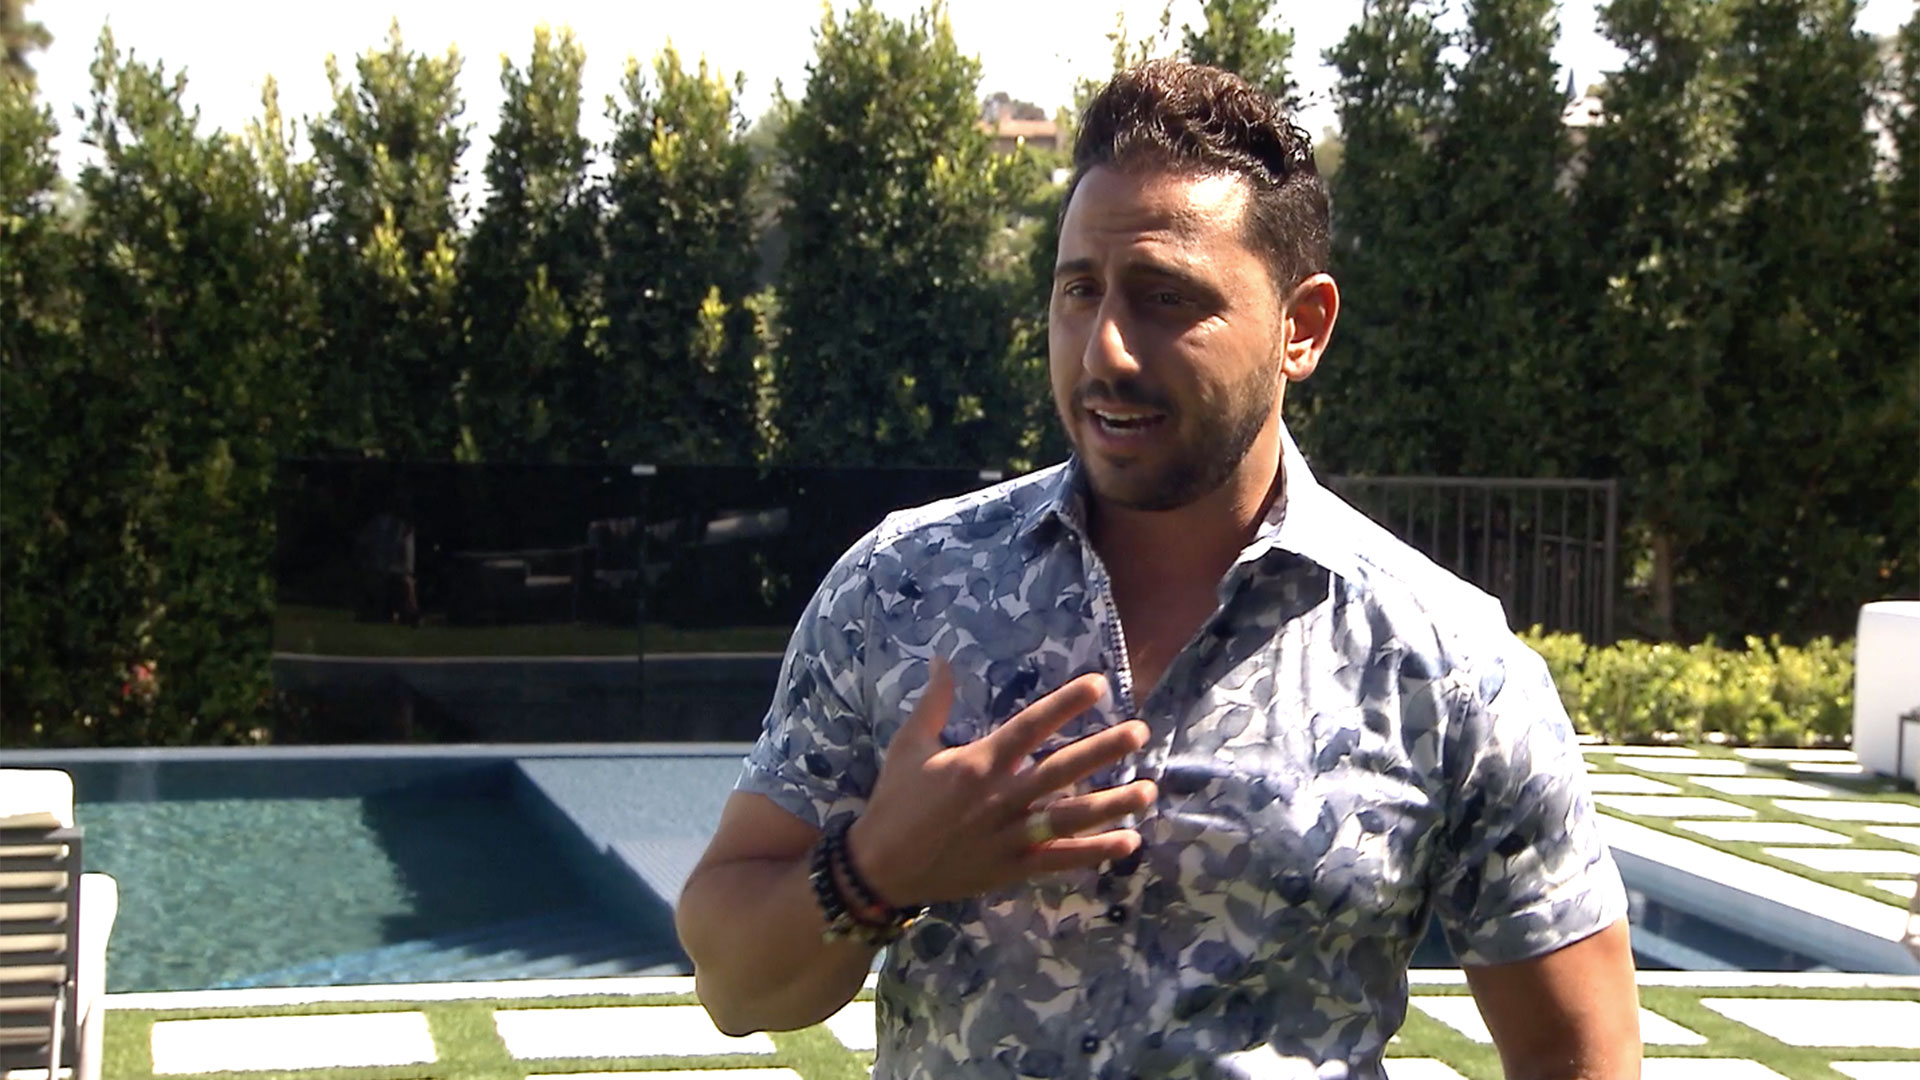 Watch Million Dollar Listing Los Angeles Highlight Josh Altman Works His Magic To Sell This